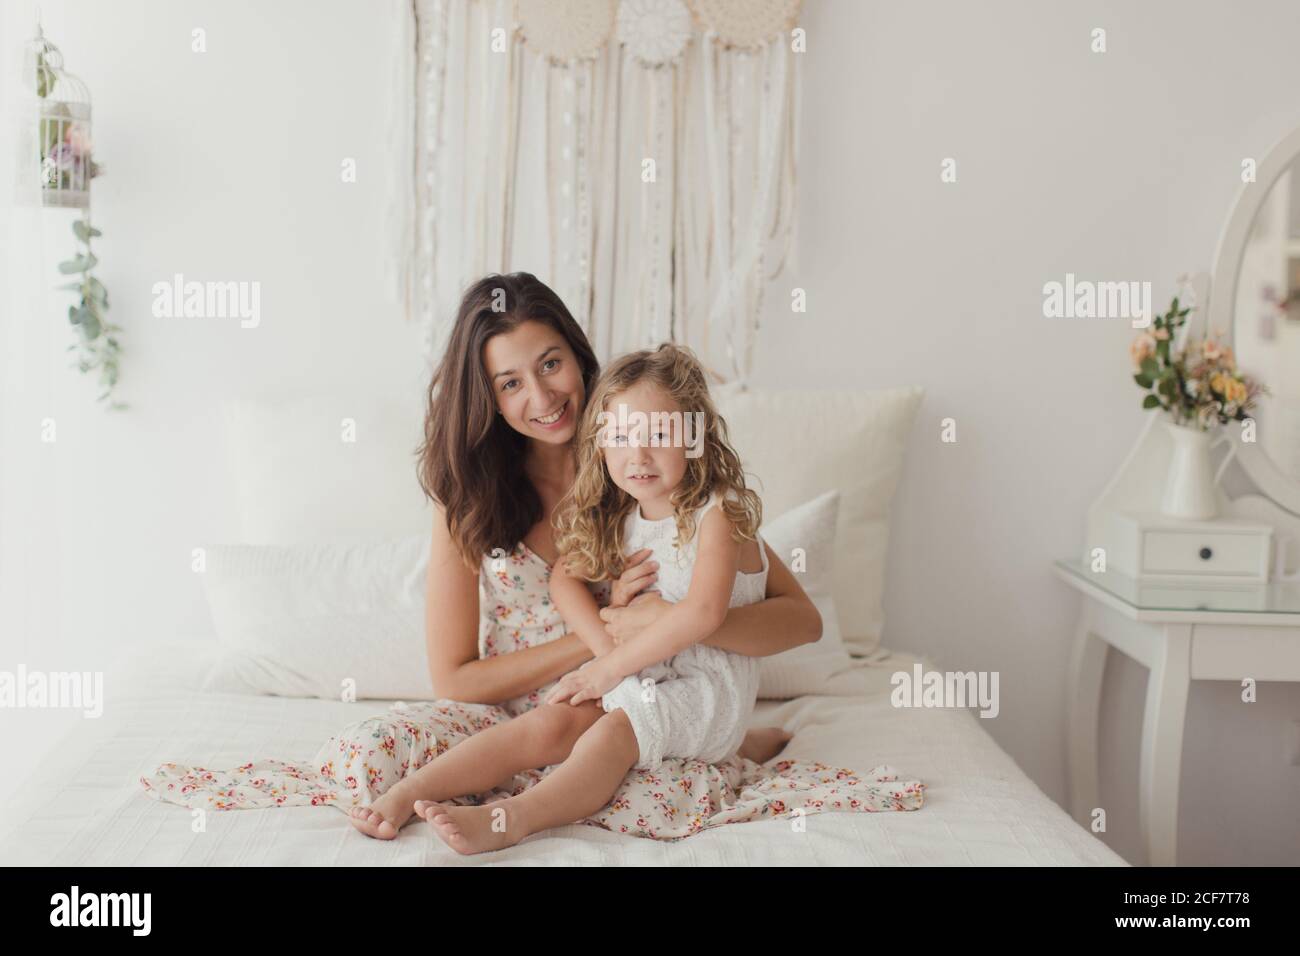 Satisfied brunette in white gown having fun with happy daughter while embracing on bed Stock Photo